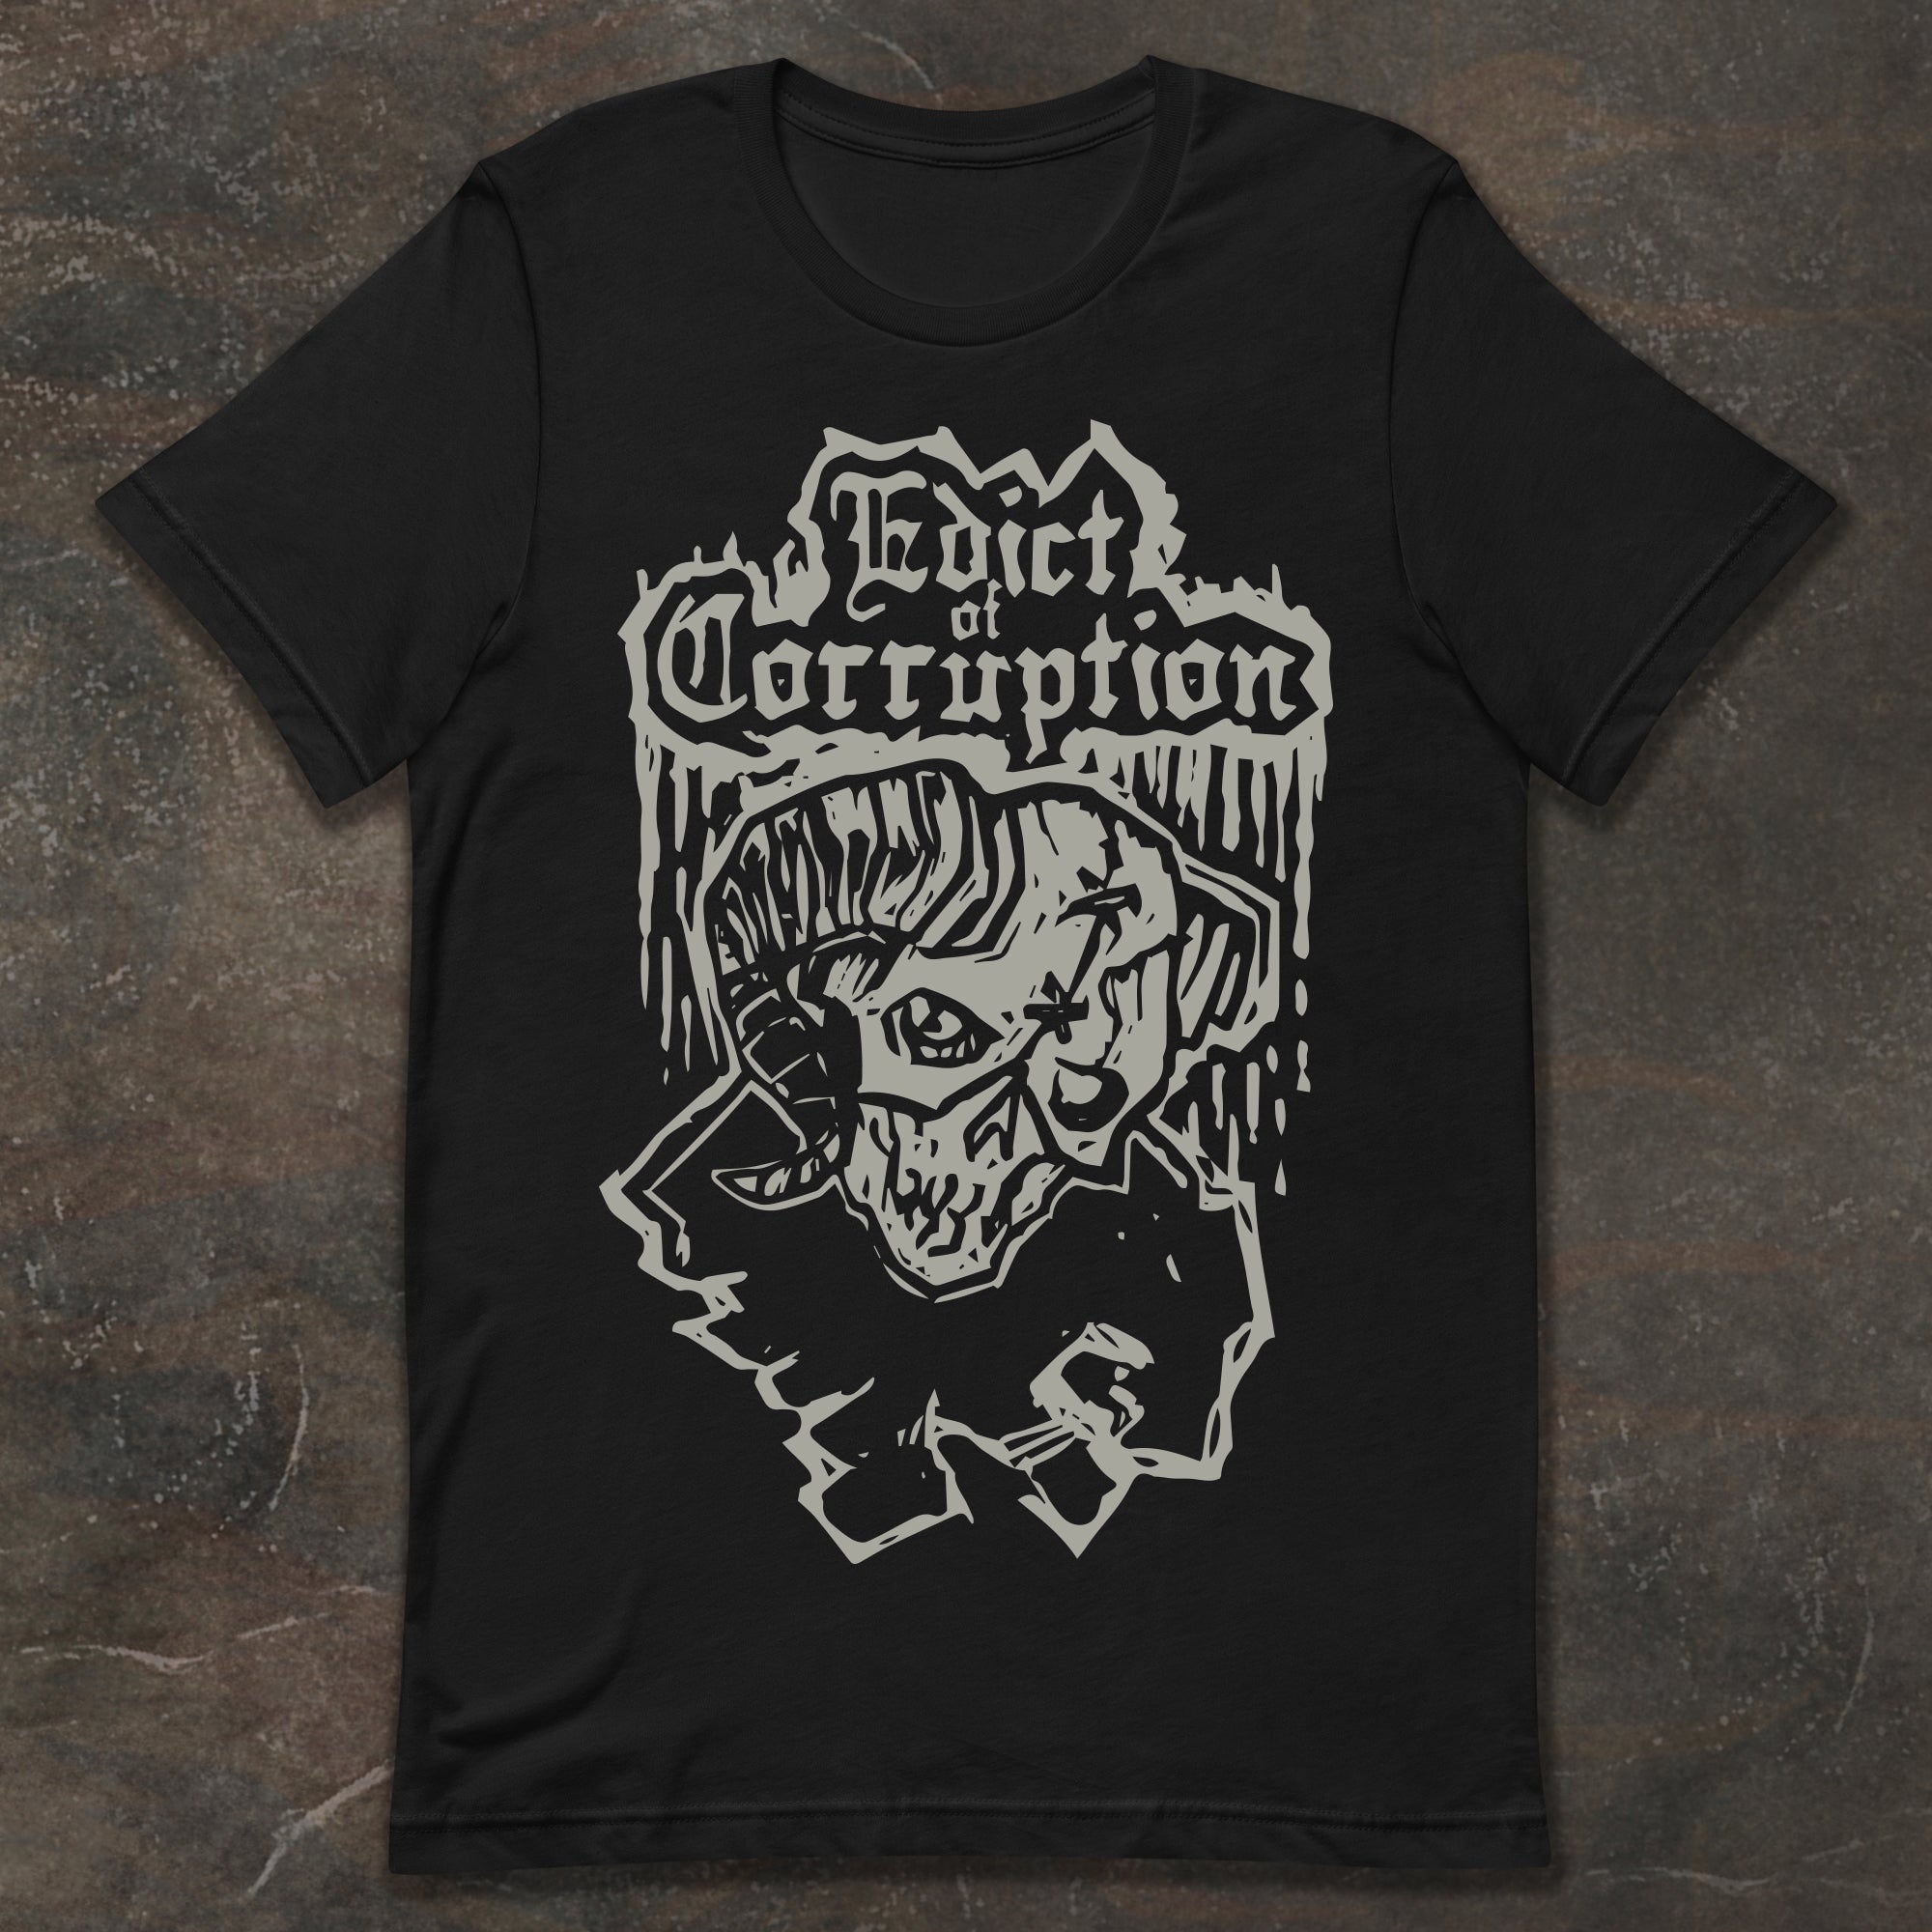 Eschaton - Edict of Corruption T-Shirt from Archon Games. Artwork by Adam Watts